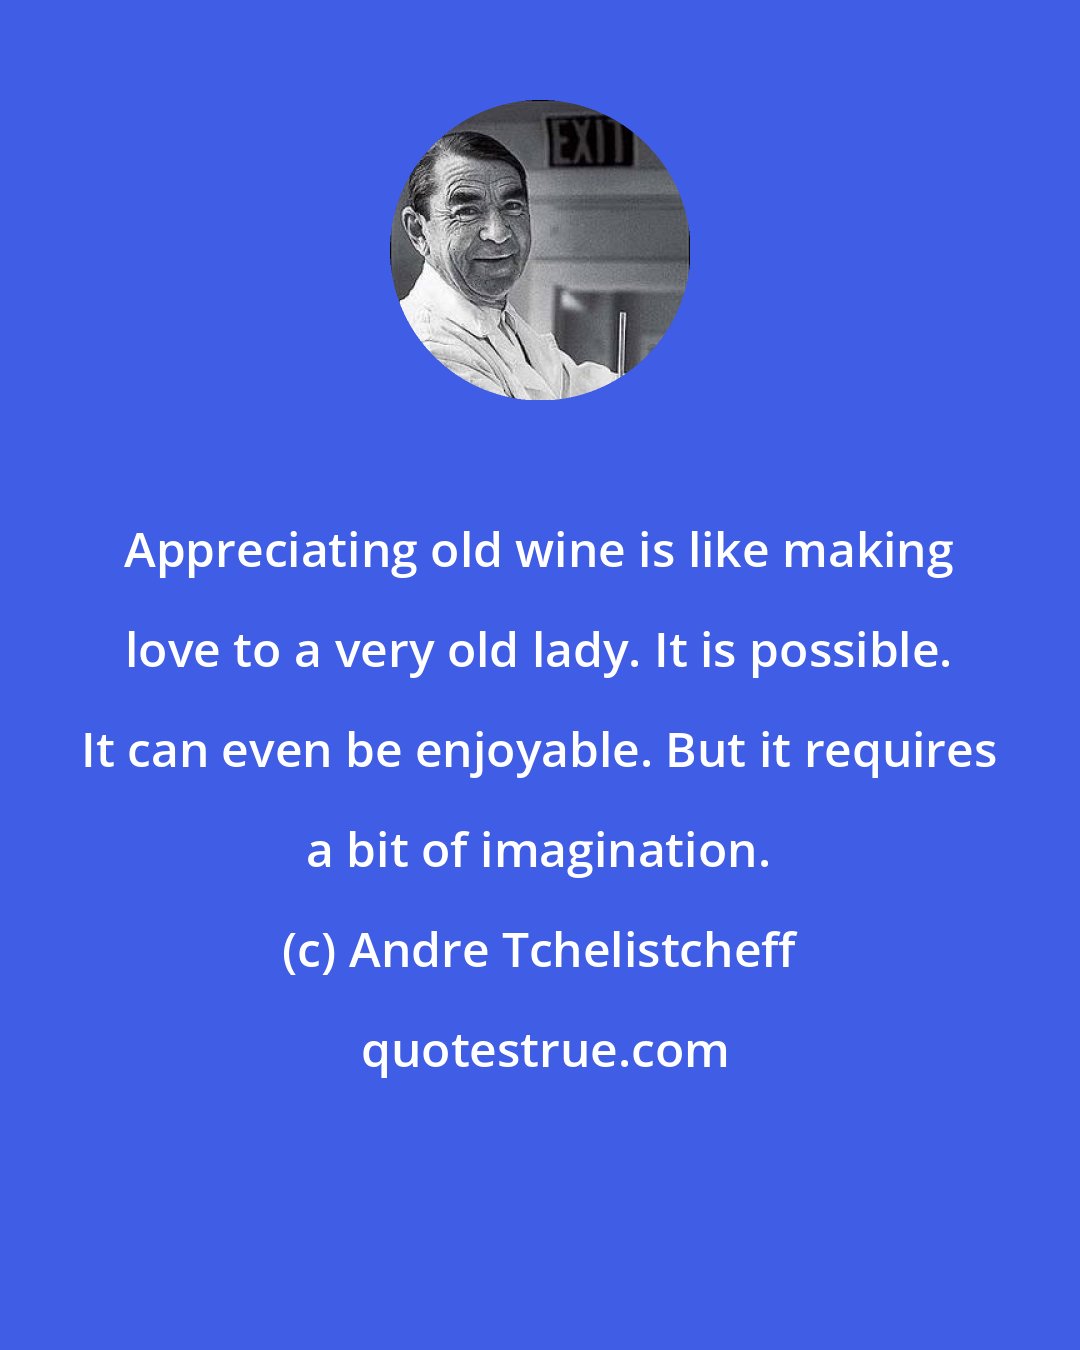 Andre Tchelistcheff: Appreciating old wine is like making love to a very old lady. It is possible. It can even be enjoyable. But it requires a bit of imagination.